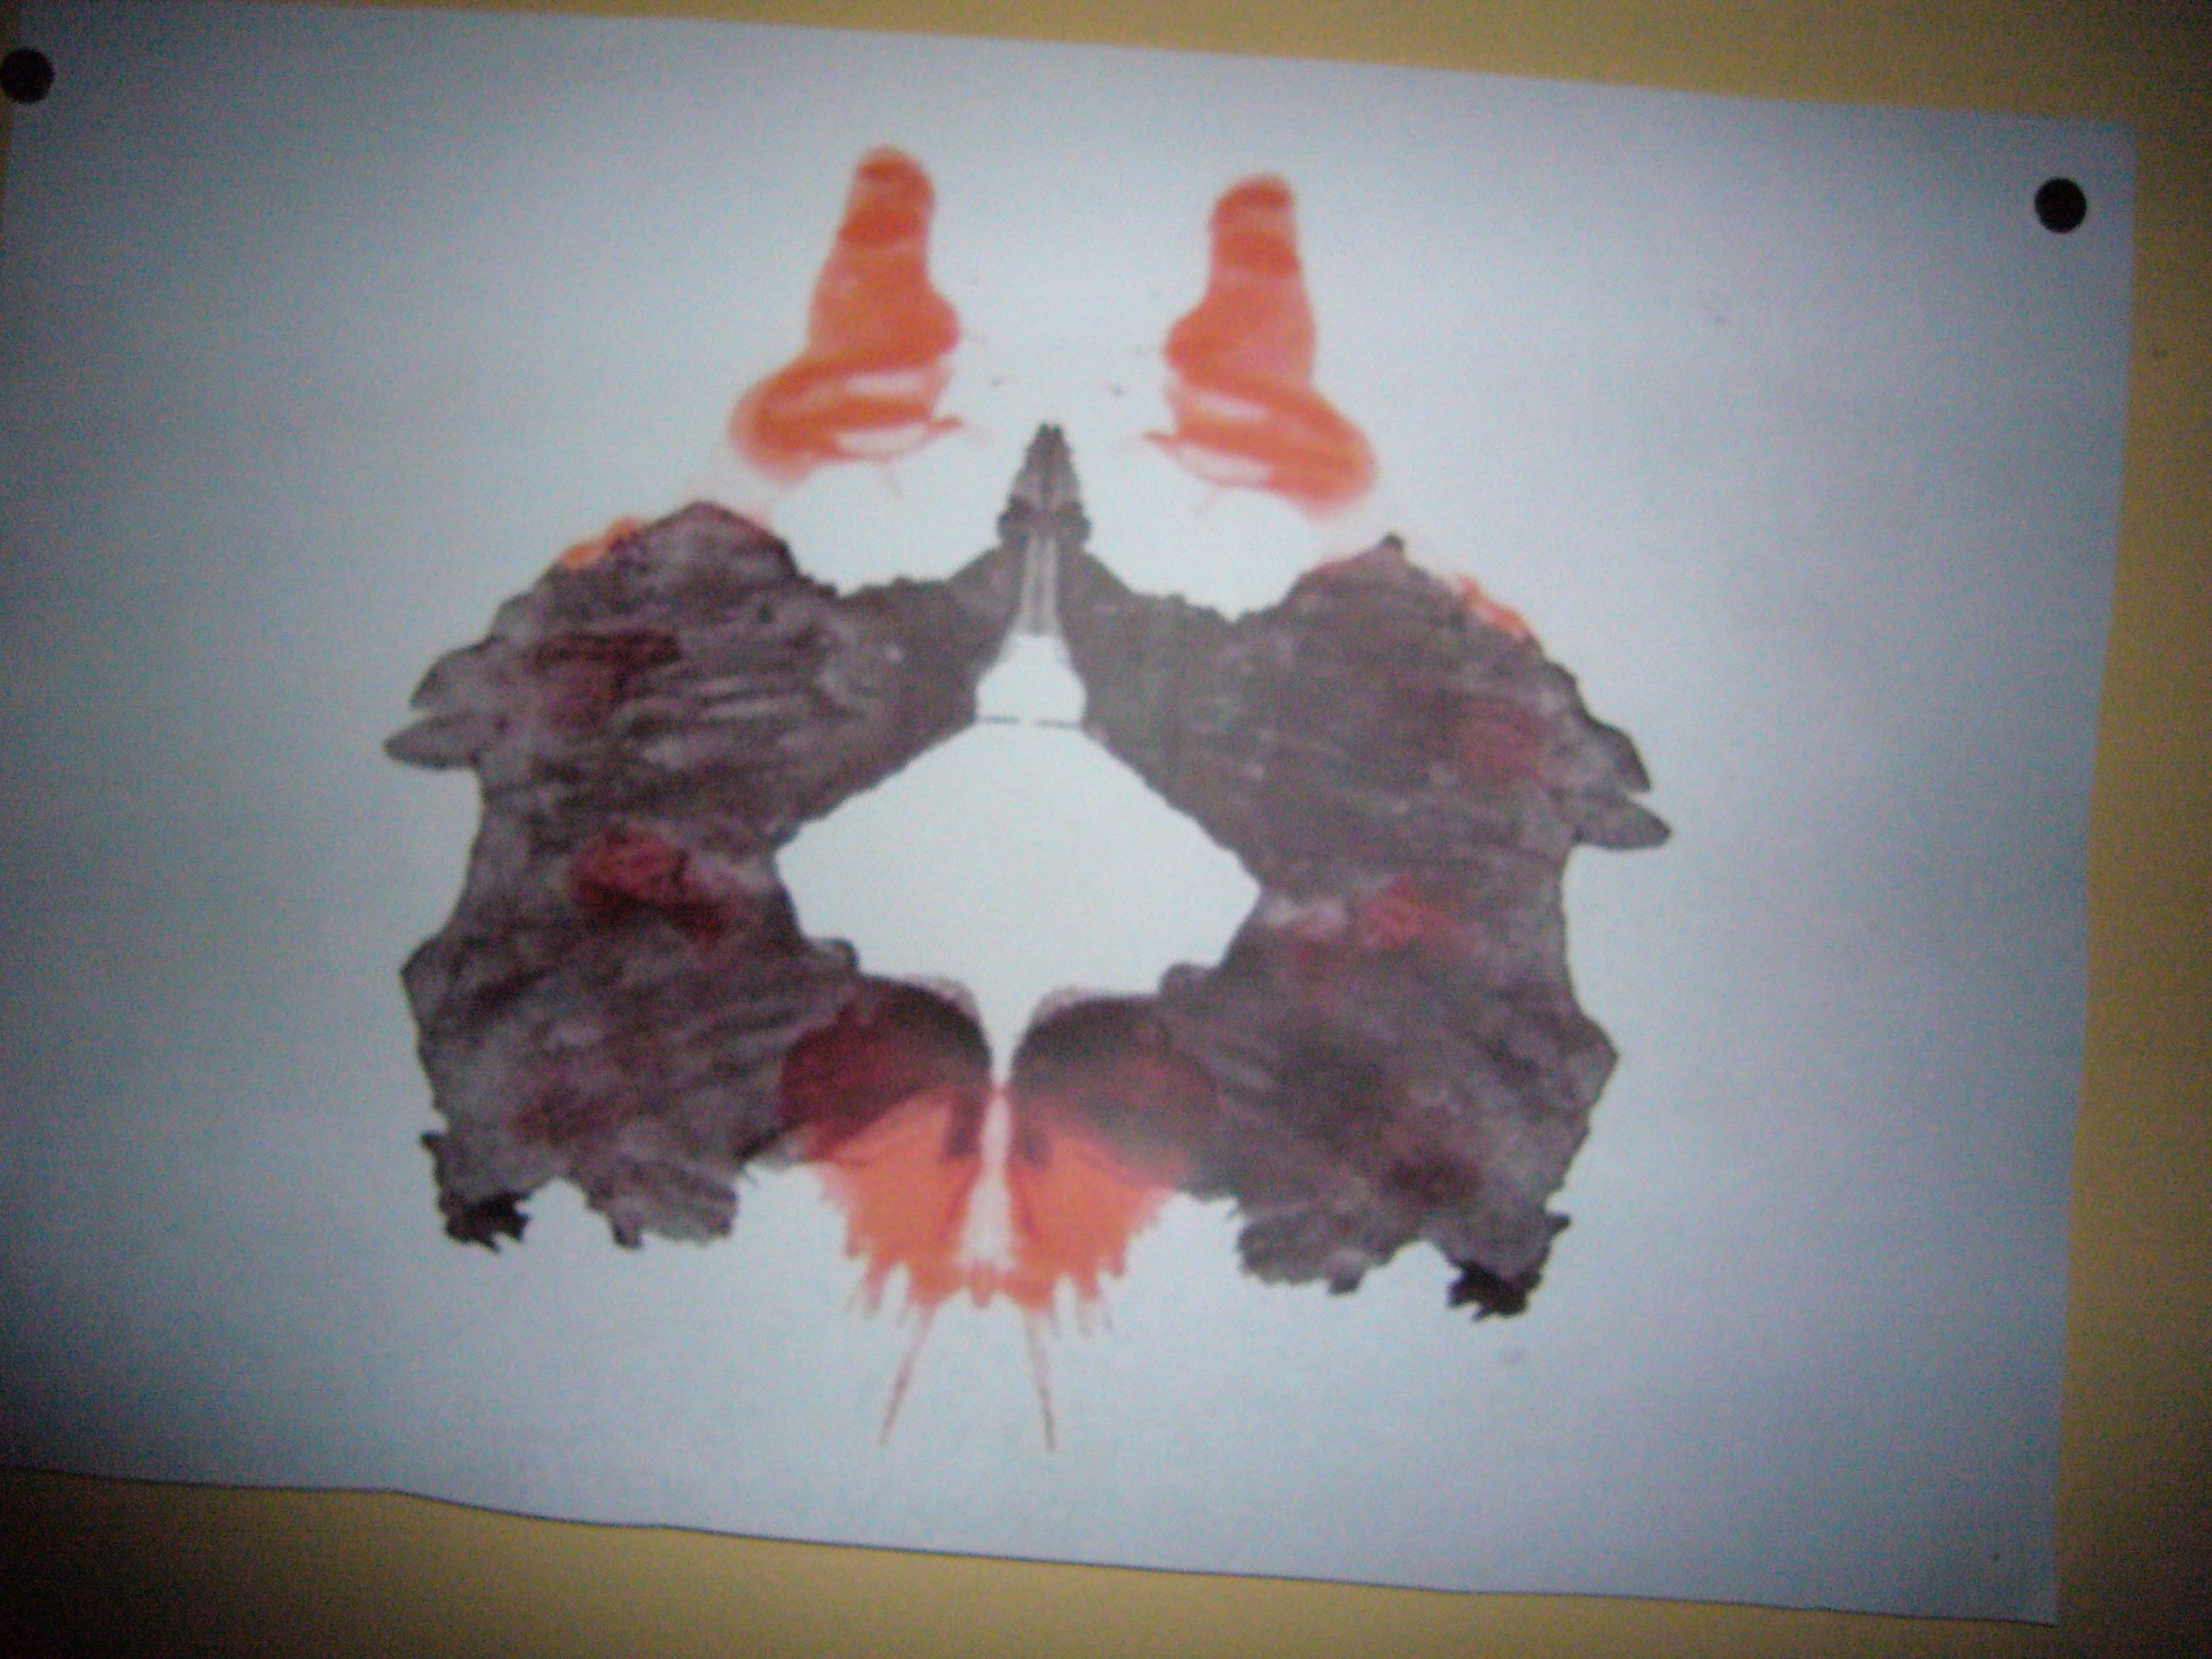 A Rorschach ink blot test that looks like two gnomes giving each other a high five.